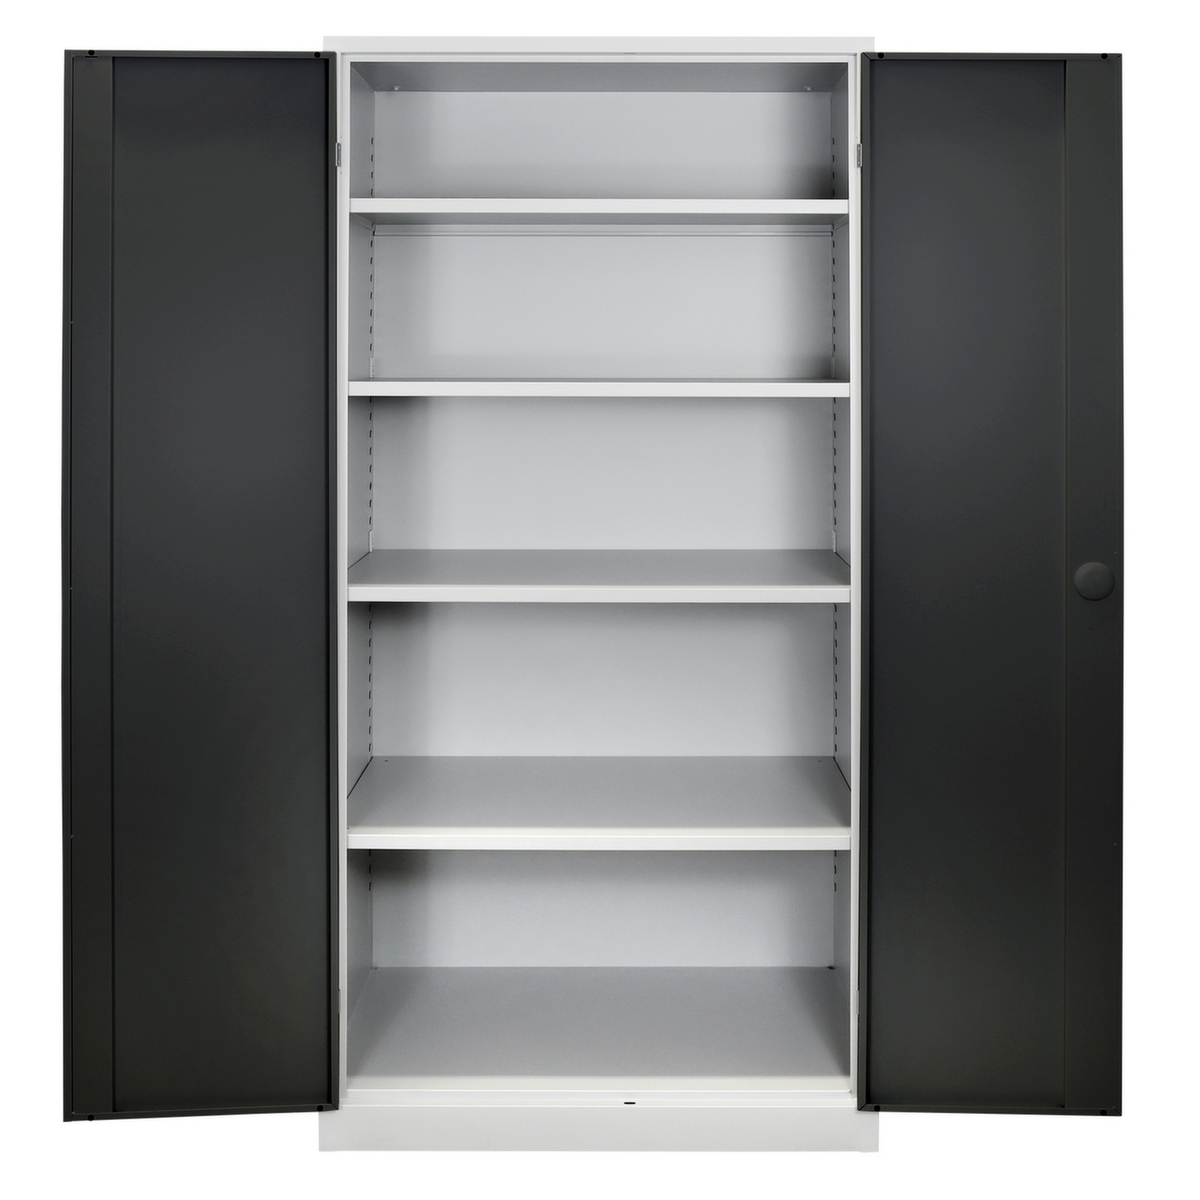 ADB Armoire universelle, largeur 920 mm  ZOOM